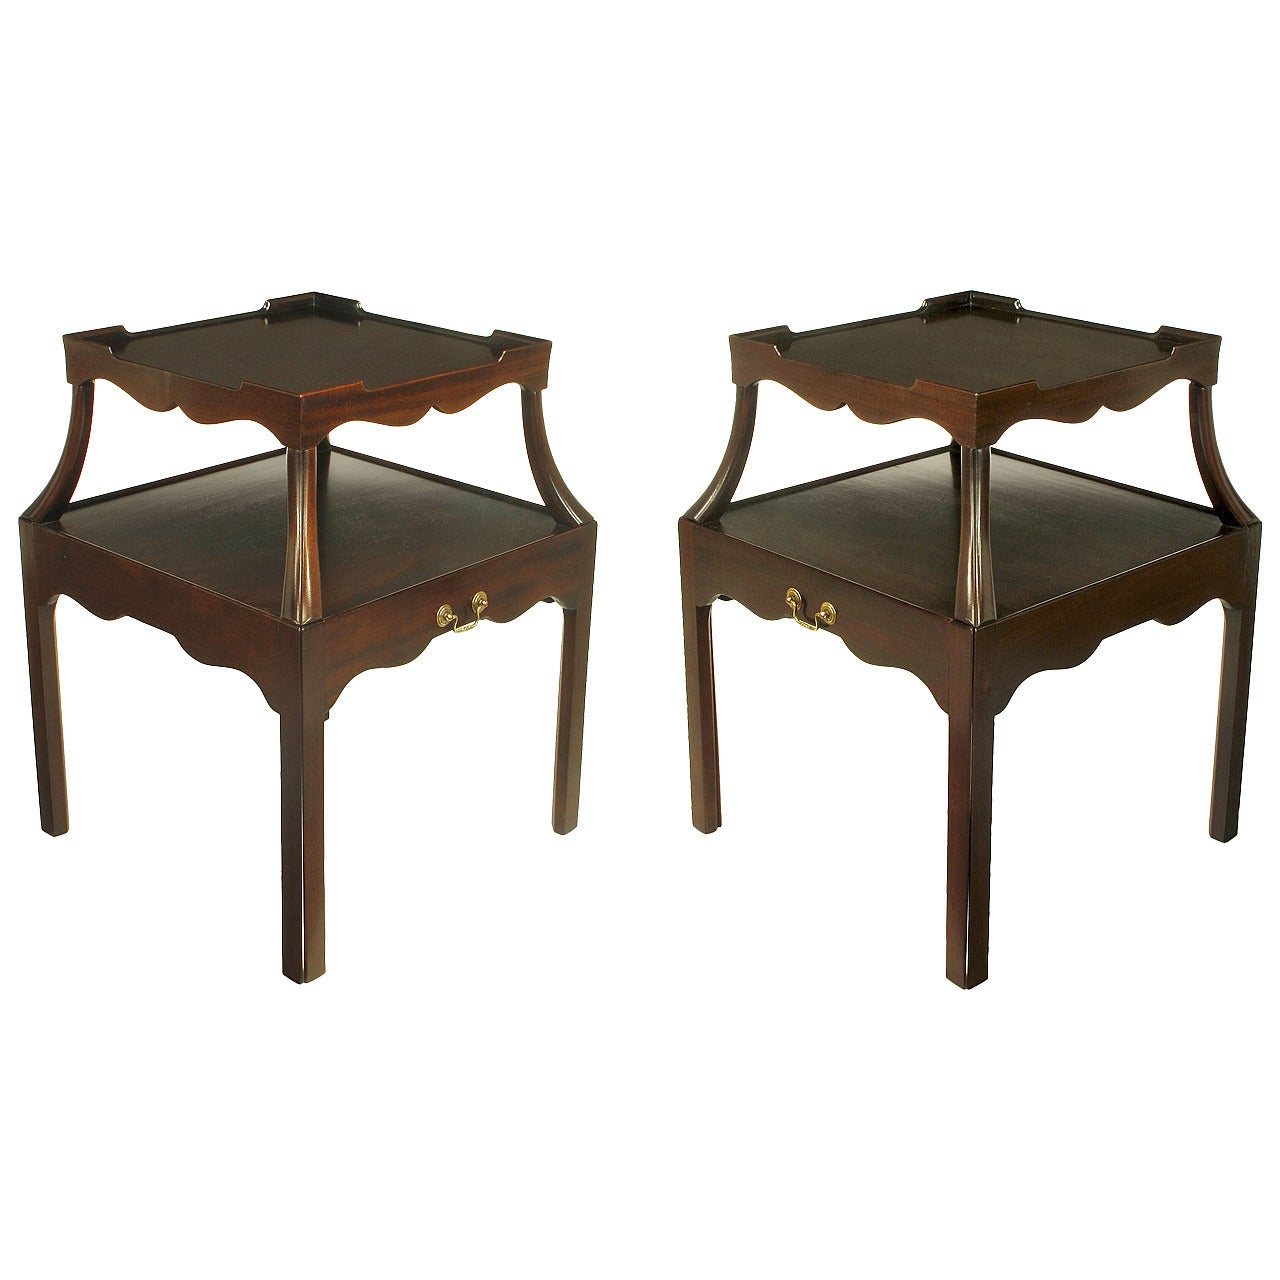 Pair of 1940s Two-Tier Mahogany End Tables with Extensible Nesting Top